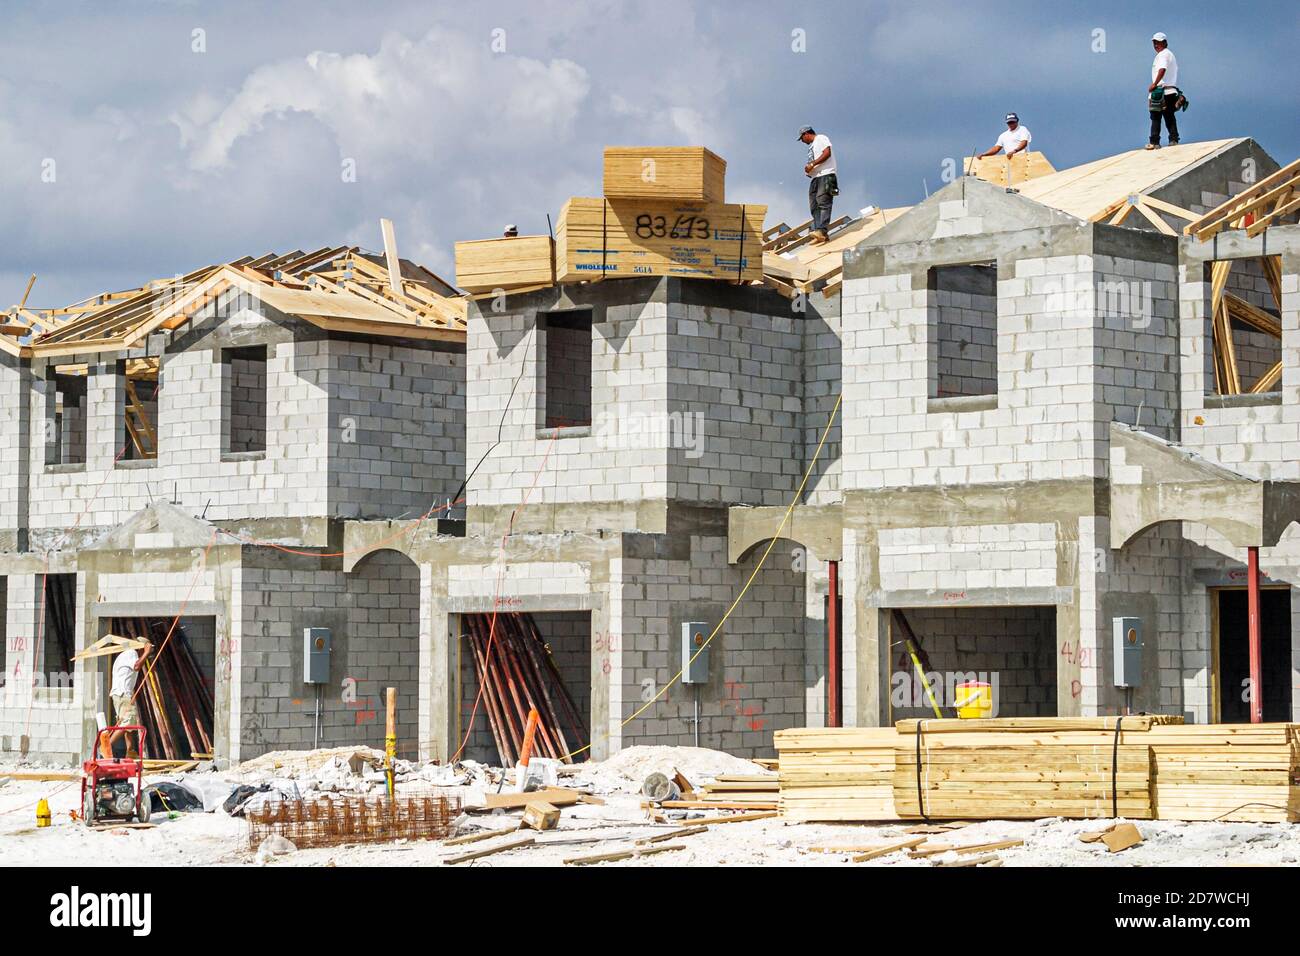 Miami Florida,Kendall townhouses under new construction site building,cinder block homes, Stock Photo